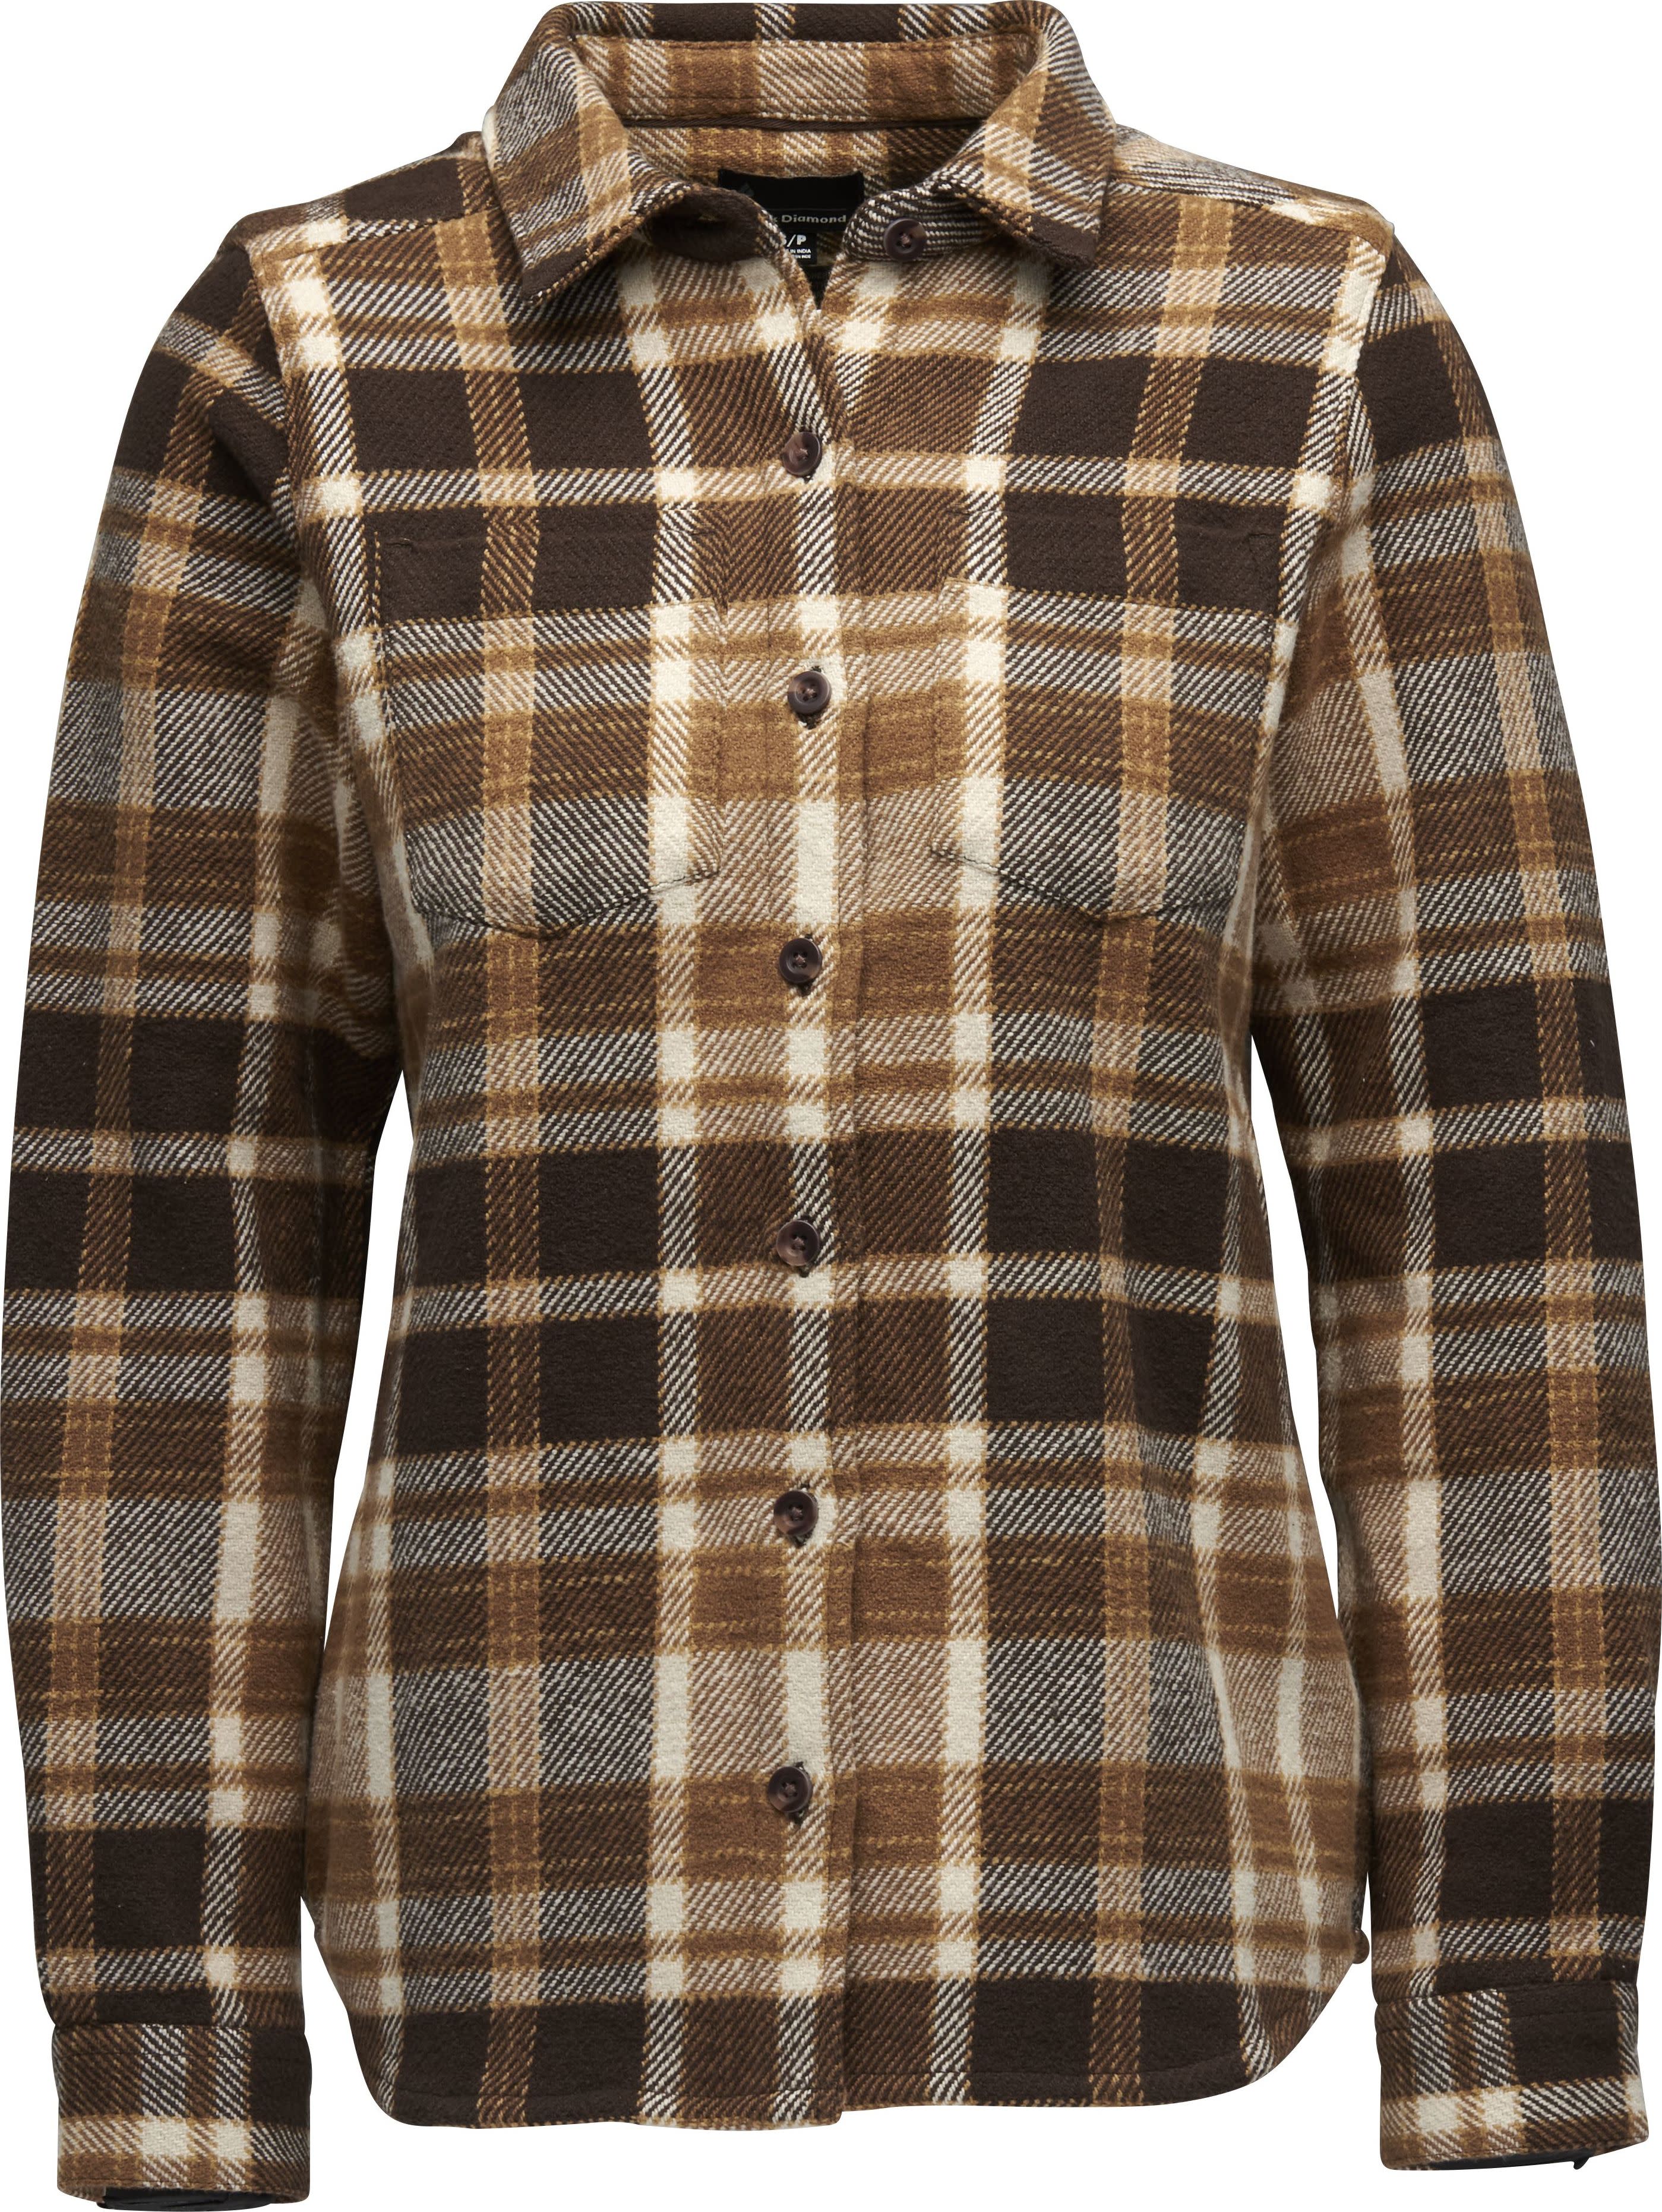 Women's Project Heavy Flannel Bark Brown-Off White Plaid